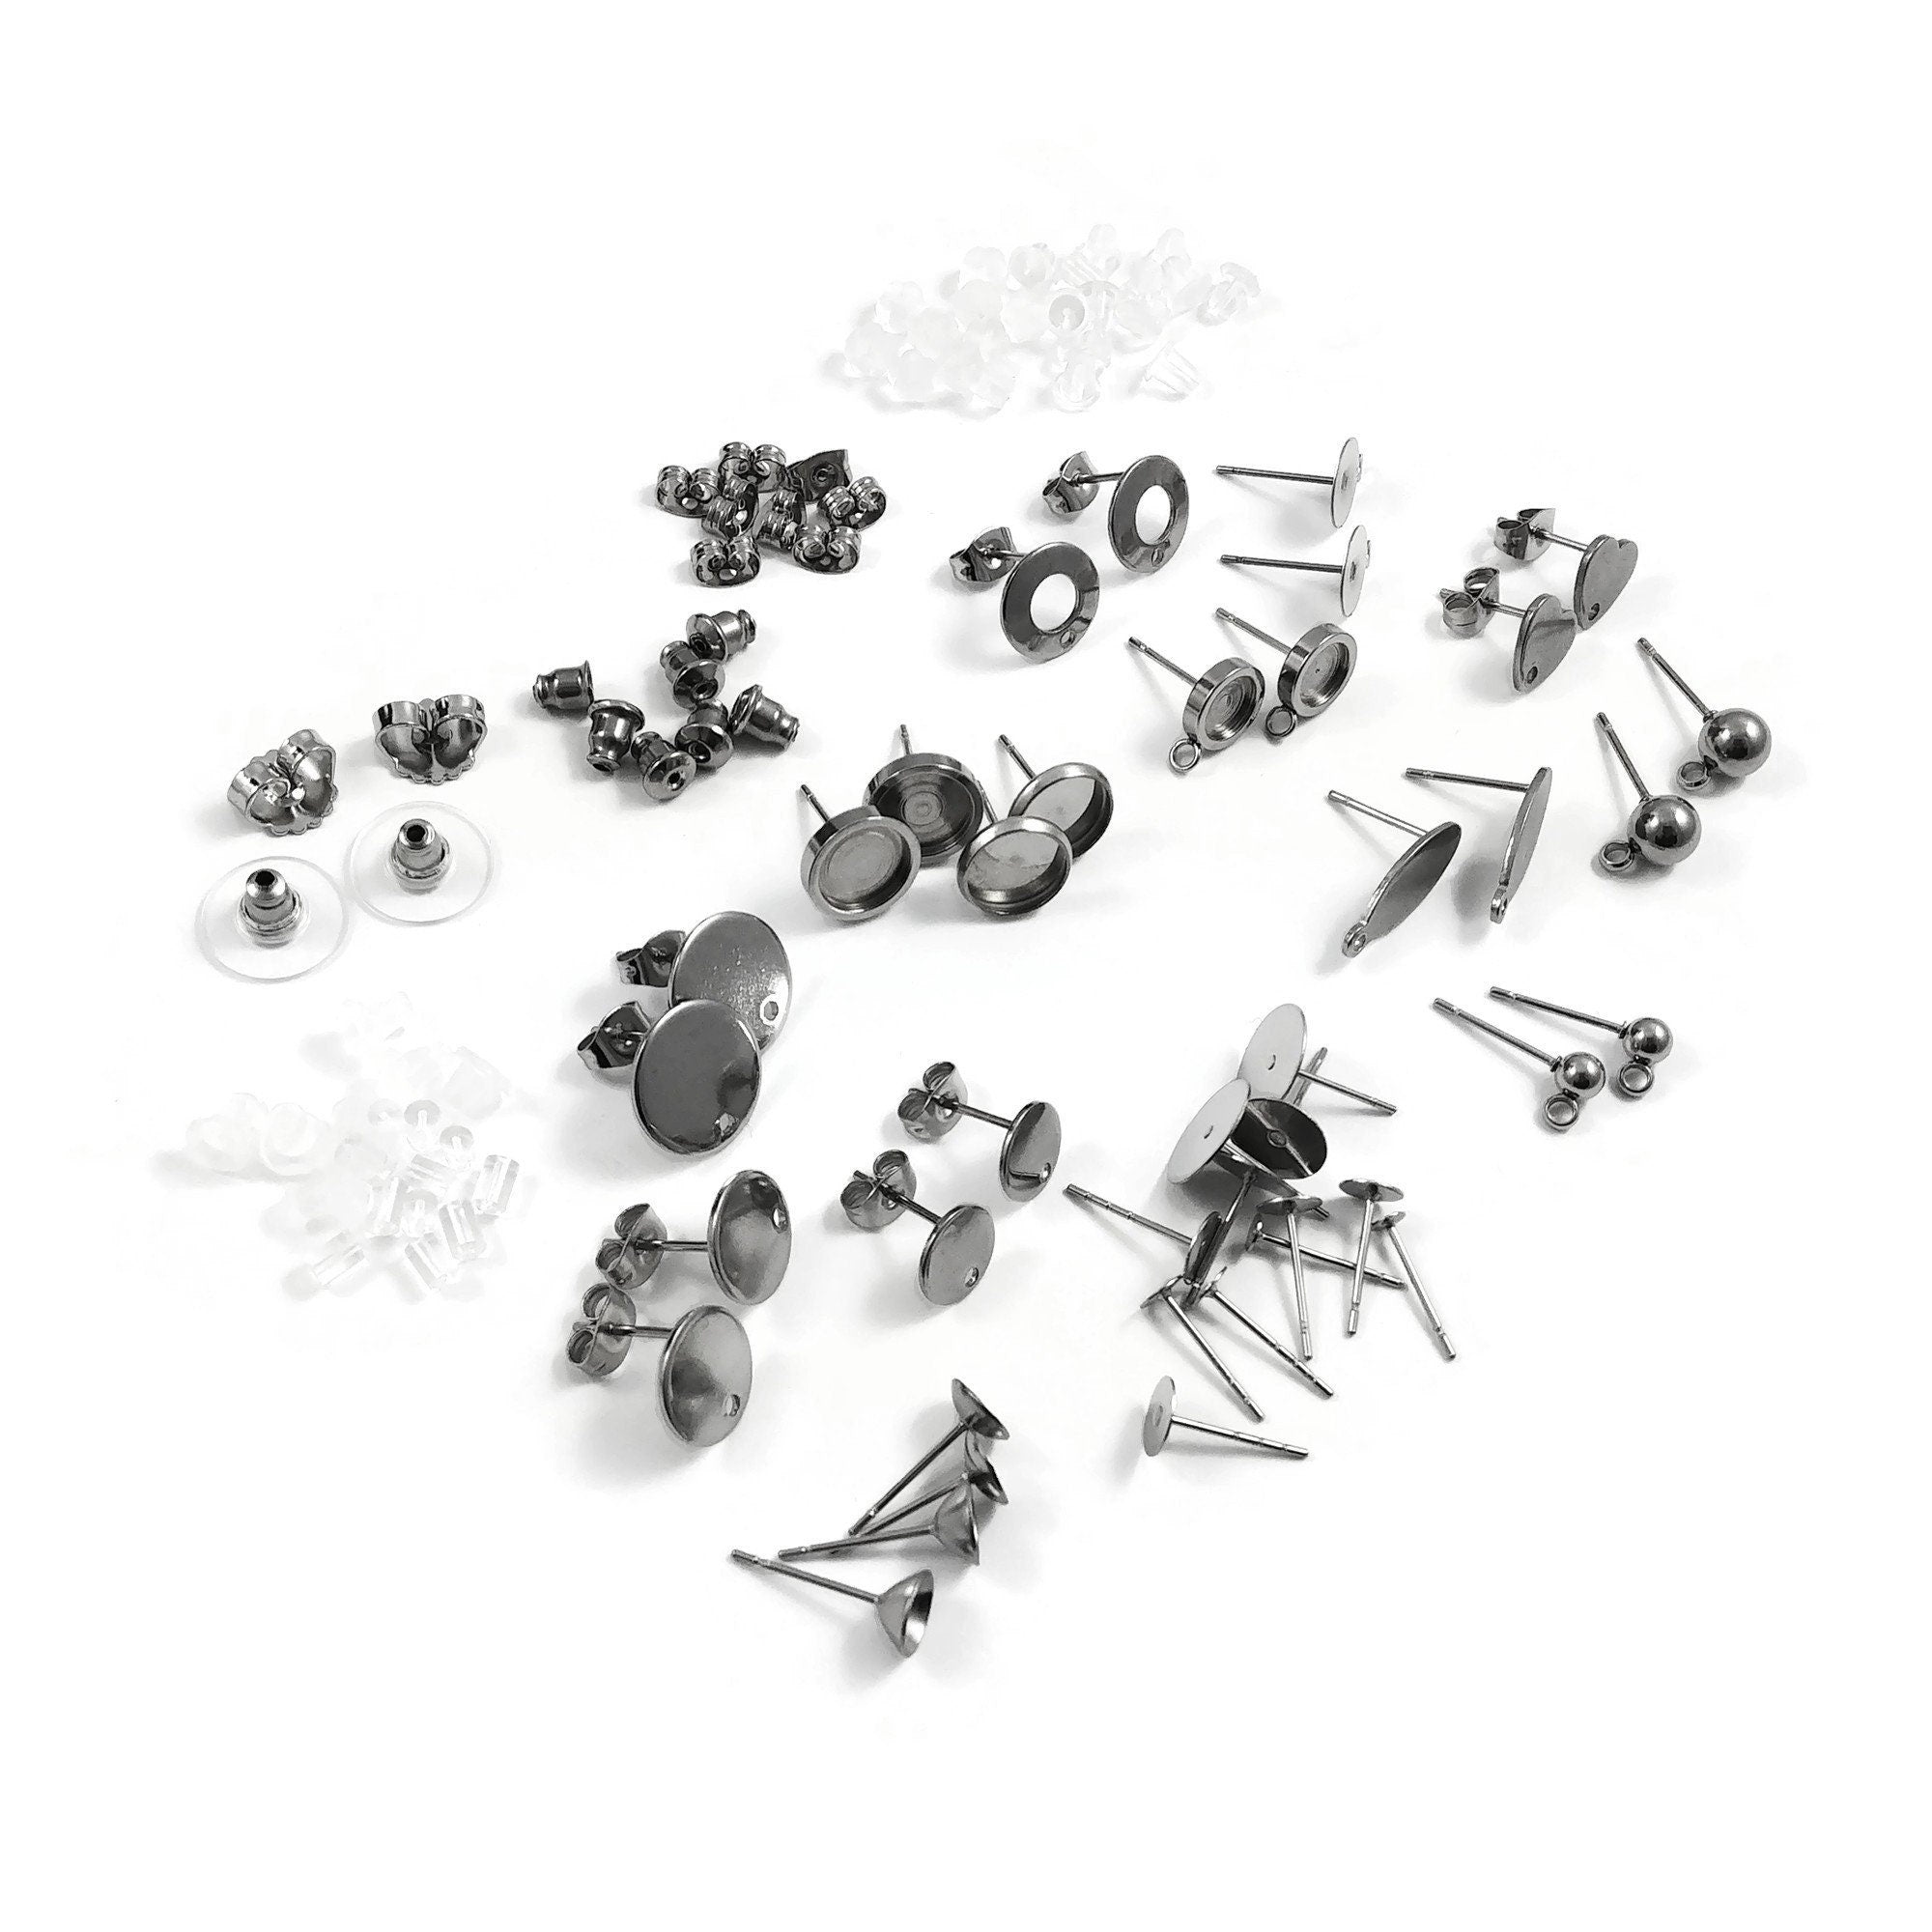 40pcs 12mm Stainless Steel Blank Stud Earring Bezel Setting for Jewelry Making with 40pcs Surgical Steel Earring Backs DIY Findings (9851)